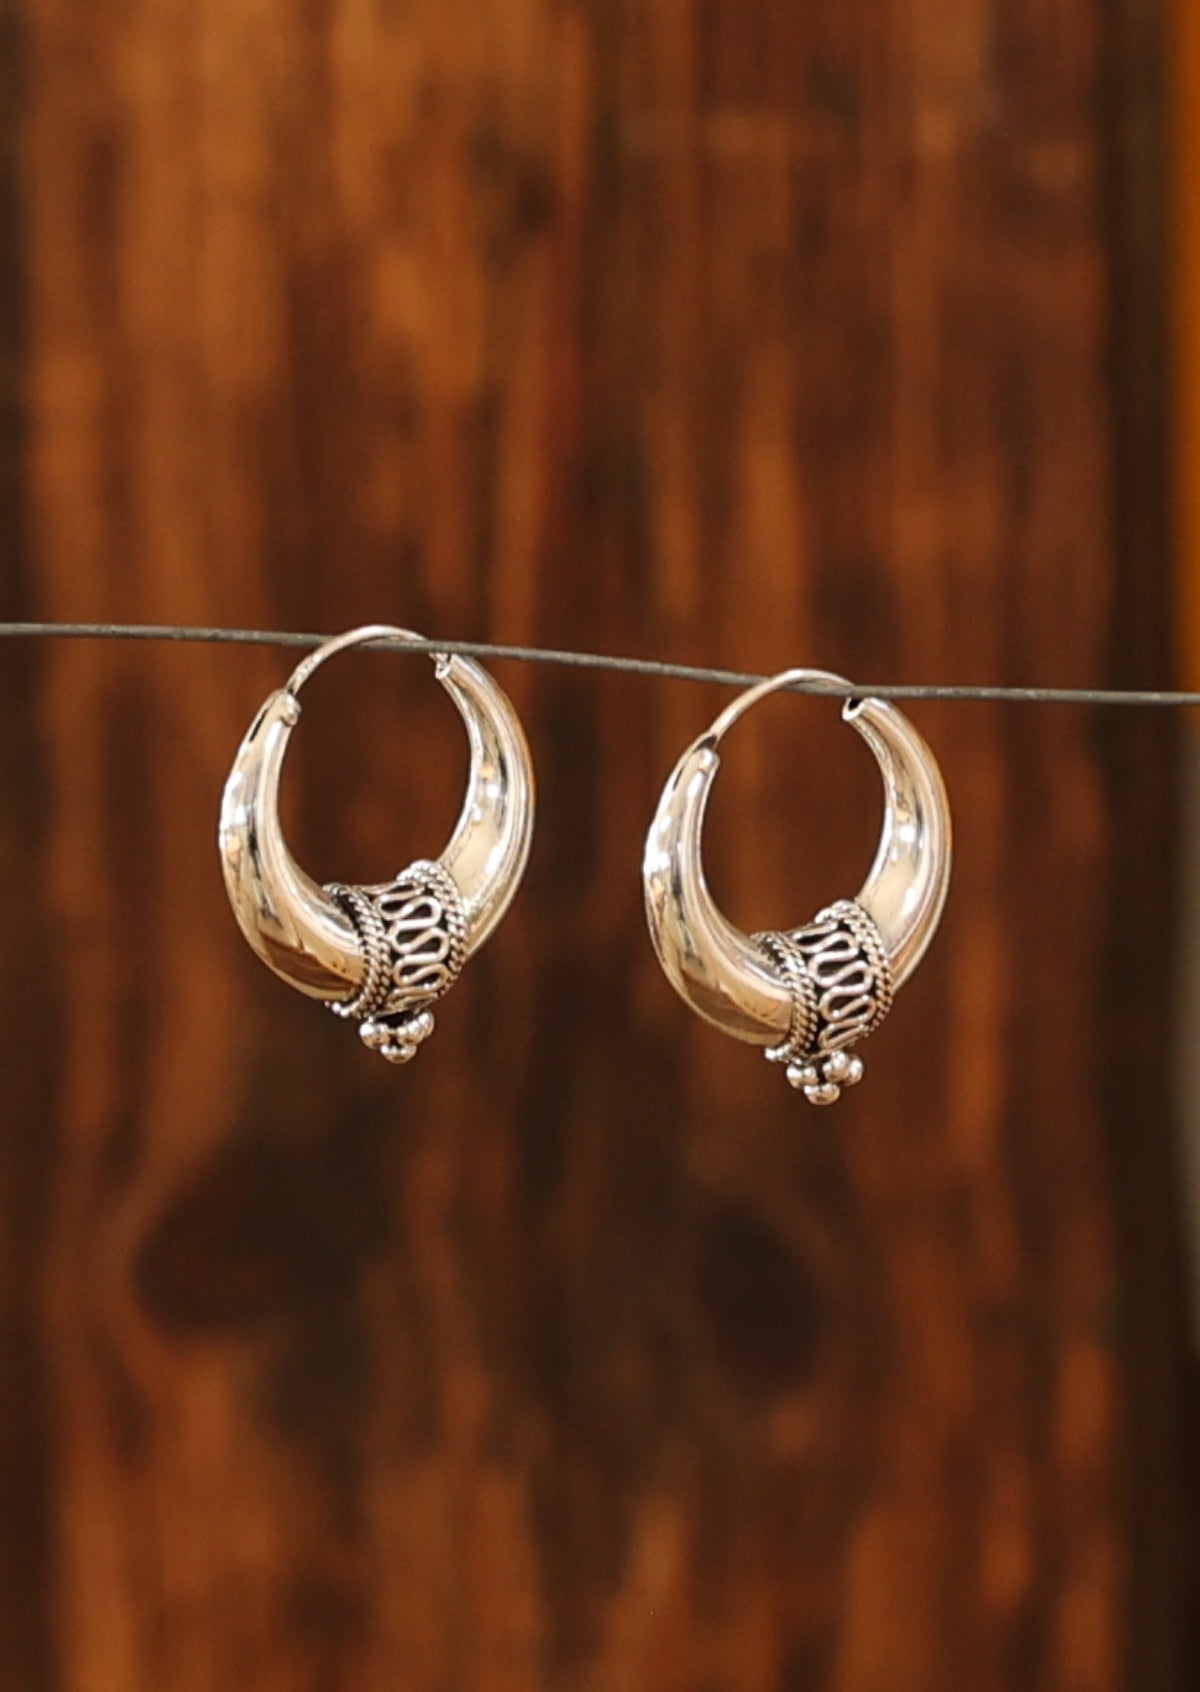 An abundance of detail at the base of the tapered earring creates interest